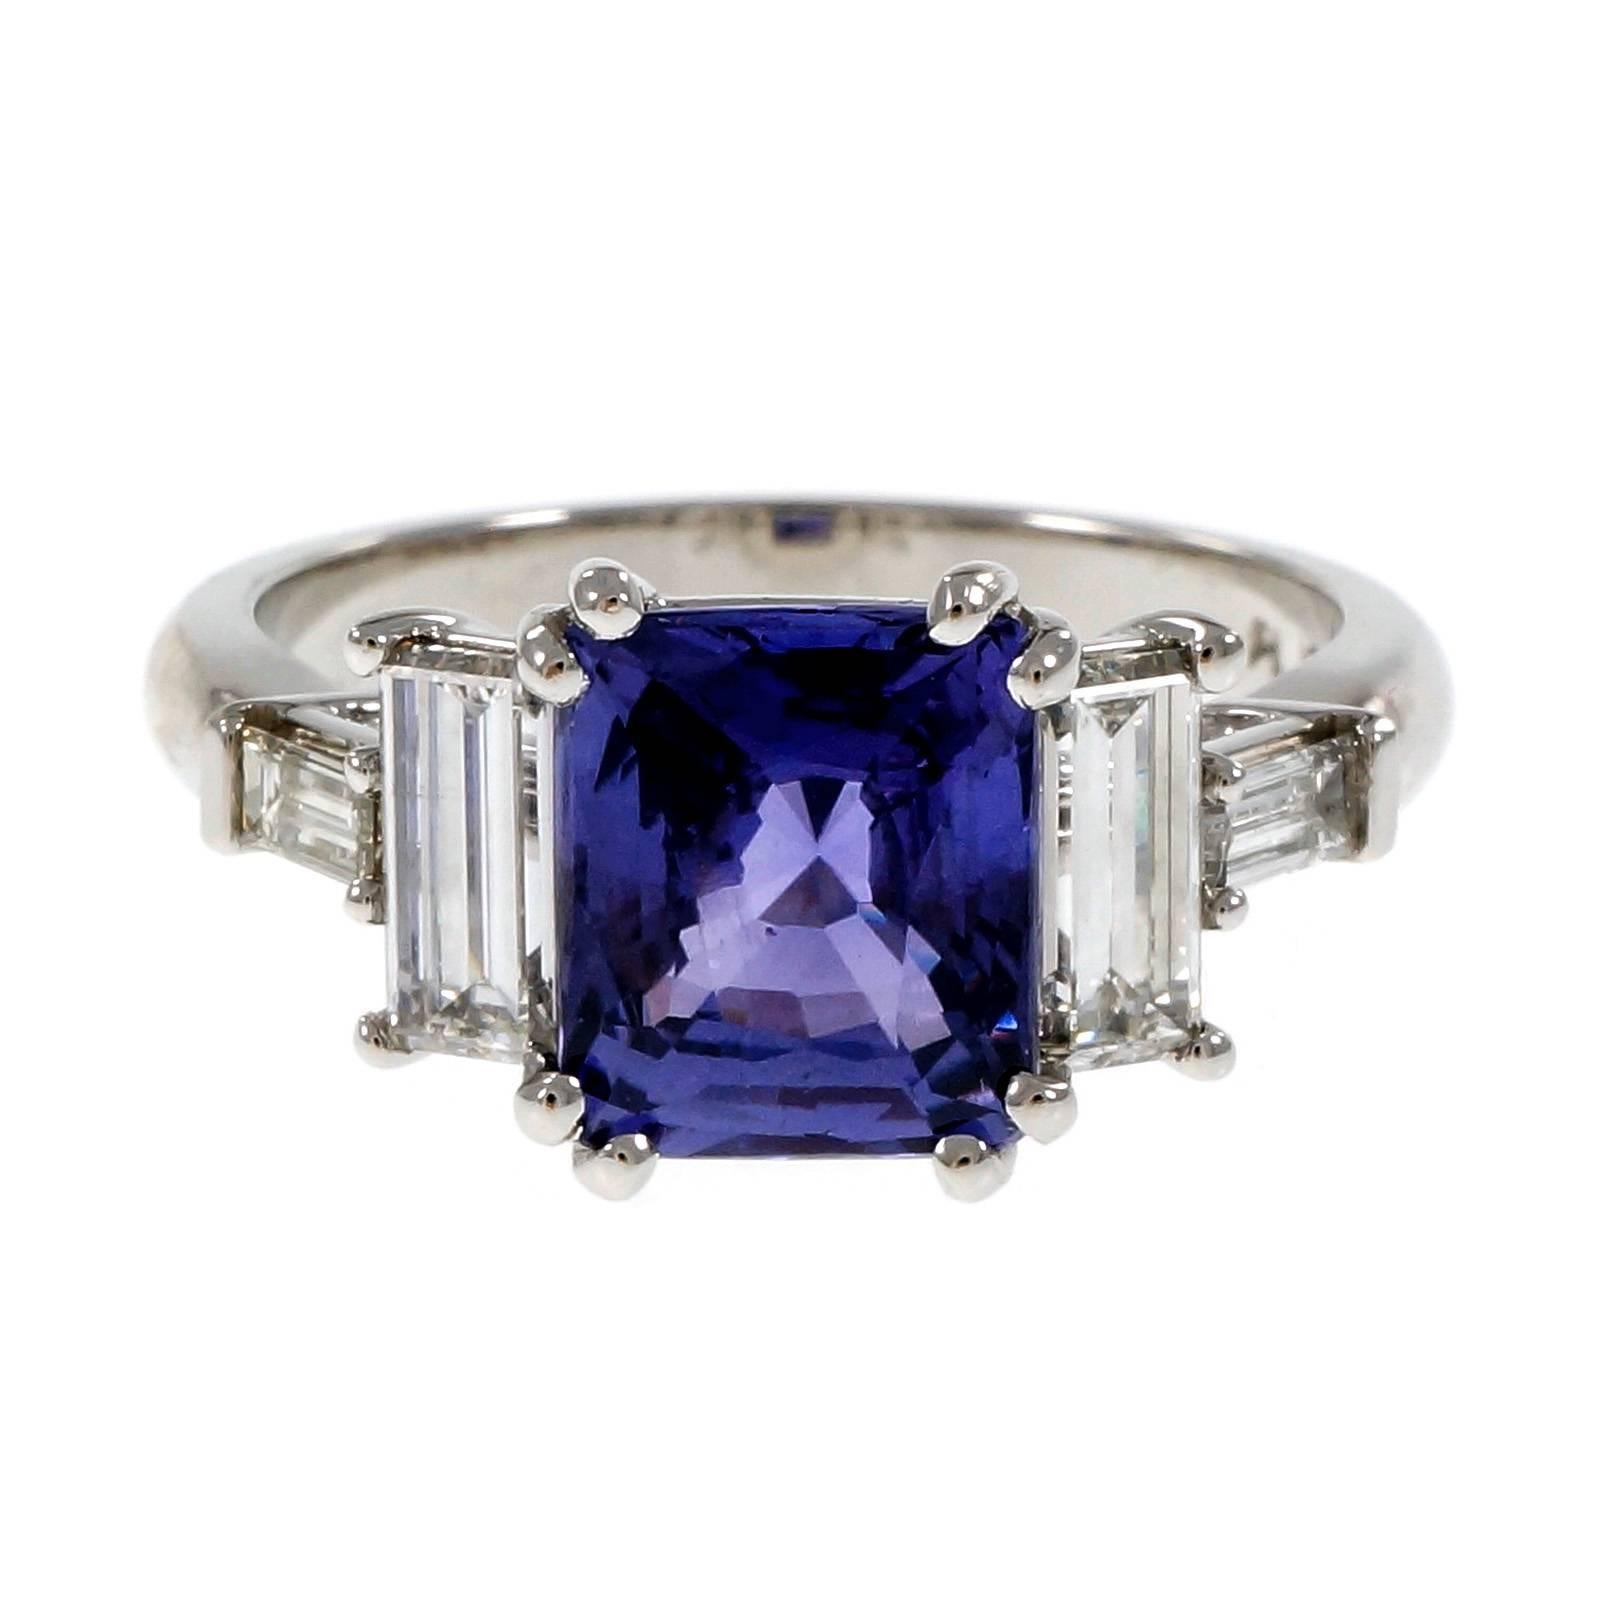 Natural no heat violet color change square brilliant cut Sapphire engagement ring. Changes color in different lights from violet to purple. Made from the Peter Suchy Workshop in Platinum with Emerald and baguette cut diamonds.

1 cushion color